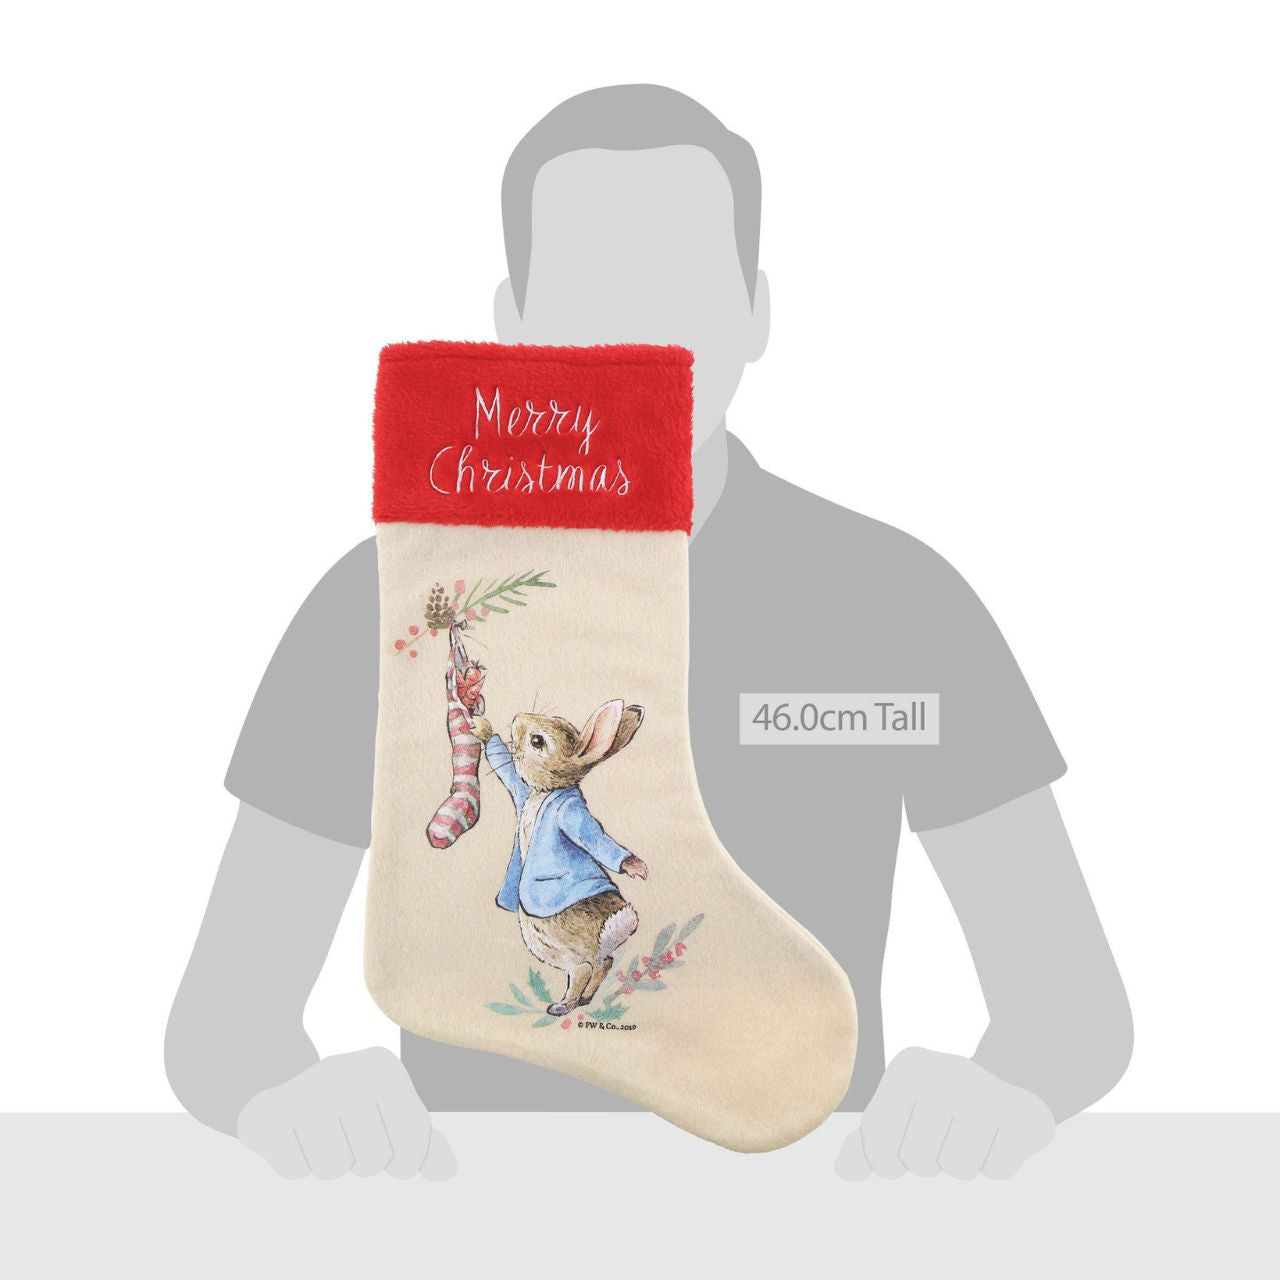 Beatrix Potter Peter Rabbit Christmas Stocking  As families cherish Christmas, we have just the gift that will make this occasion extra special. Spread the joy of Christmas with this beautiful Peter Rabbit Christmas Stocking. This unique Christmas gift will make a great traditional gift, which can be enjoyed year after year.